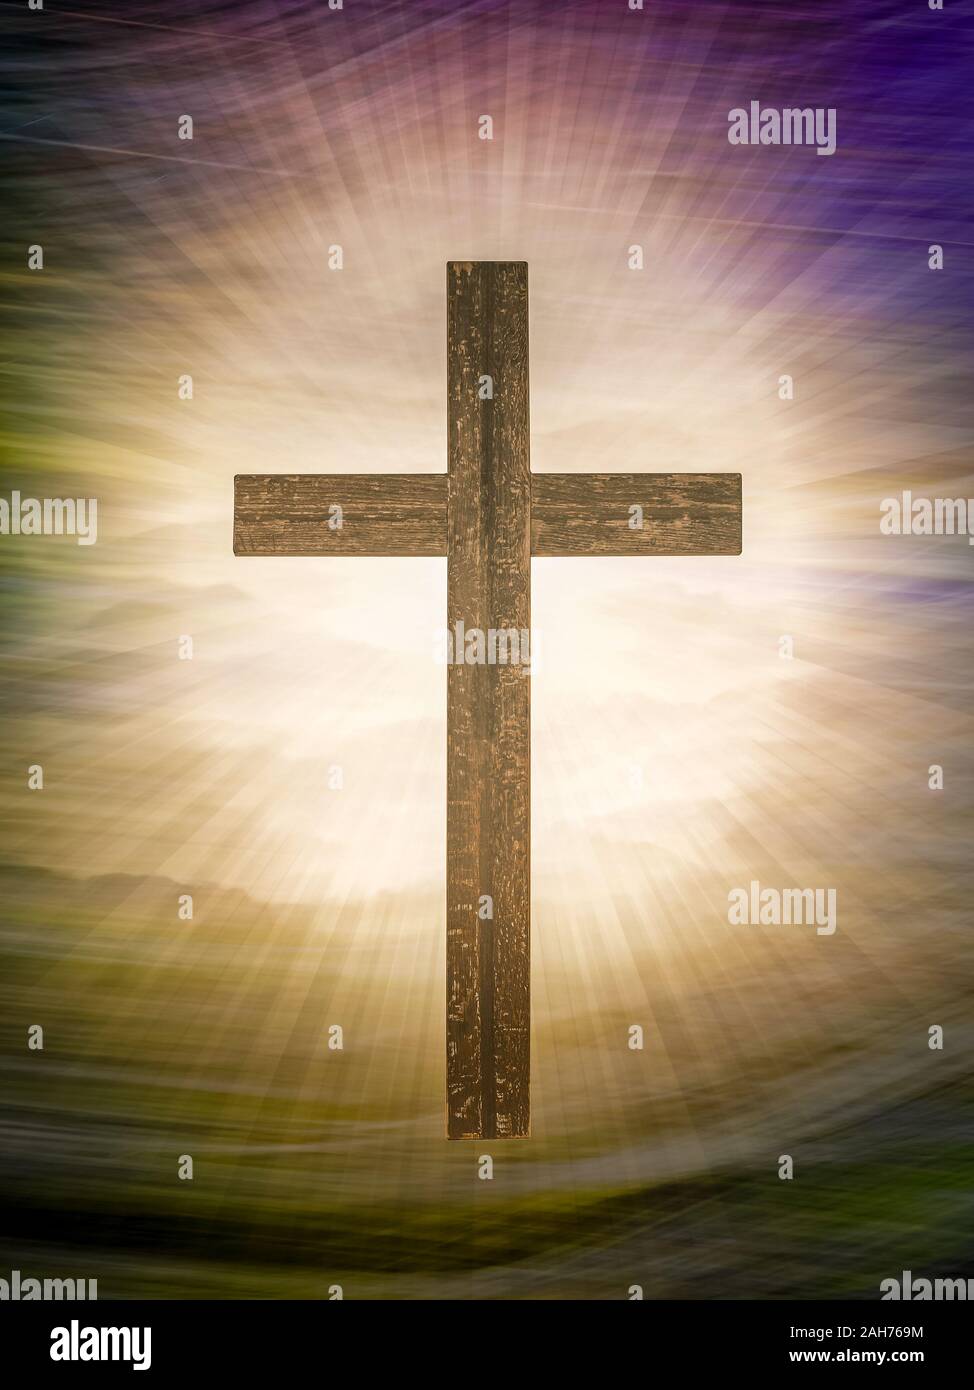 Christian cross on abstract landscape background with rays of glory. Religious Easter. Stock Photo